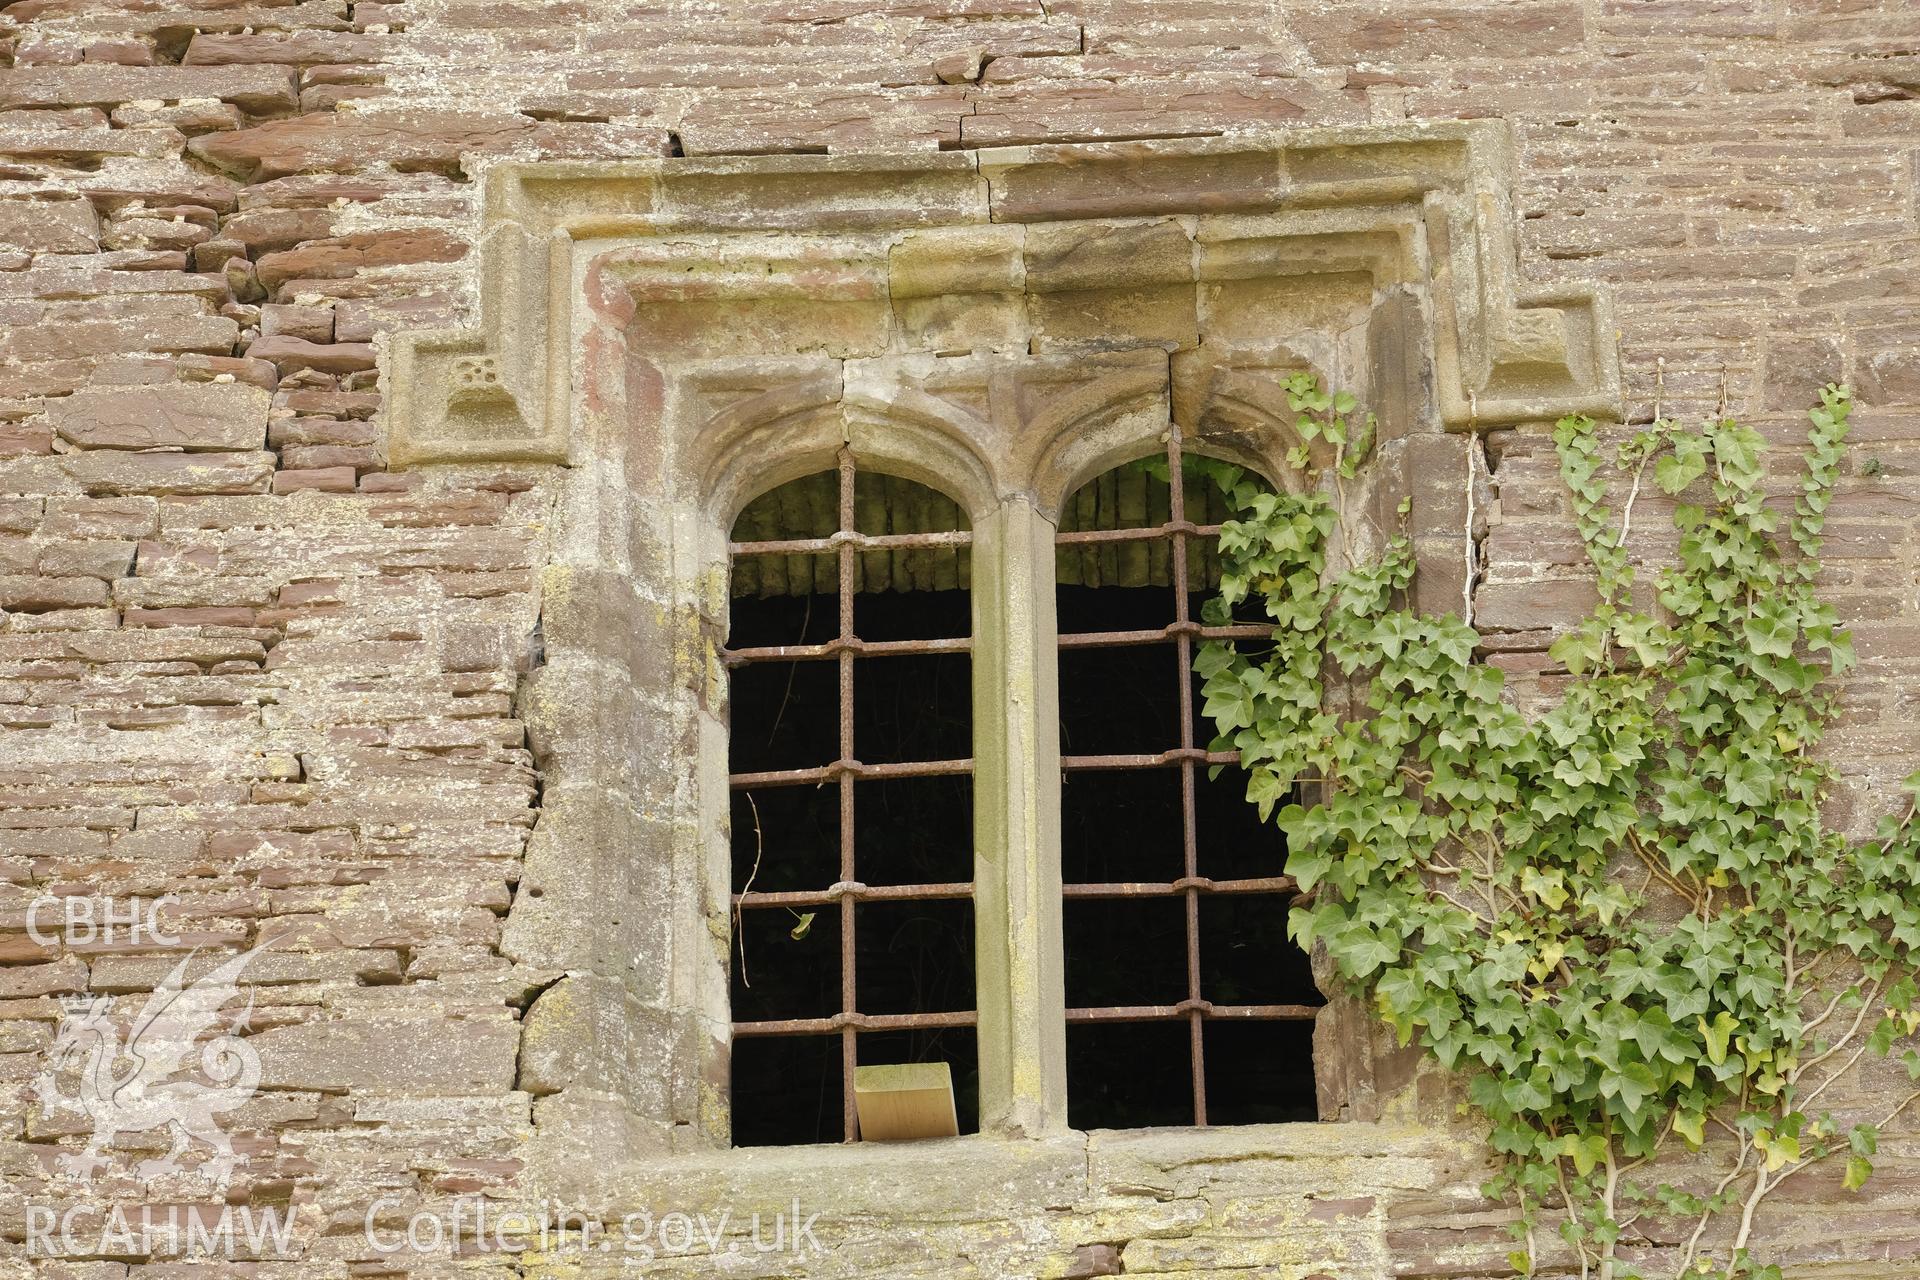 Colour photograph showing Great Porthmel Gatehouse - upper-stage window in NW front. Produced as part of Historic Building Recording for Great Porthamel Gatehouse, carried out by Richard Hayman, April 2021.